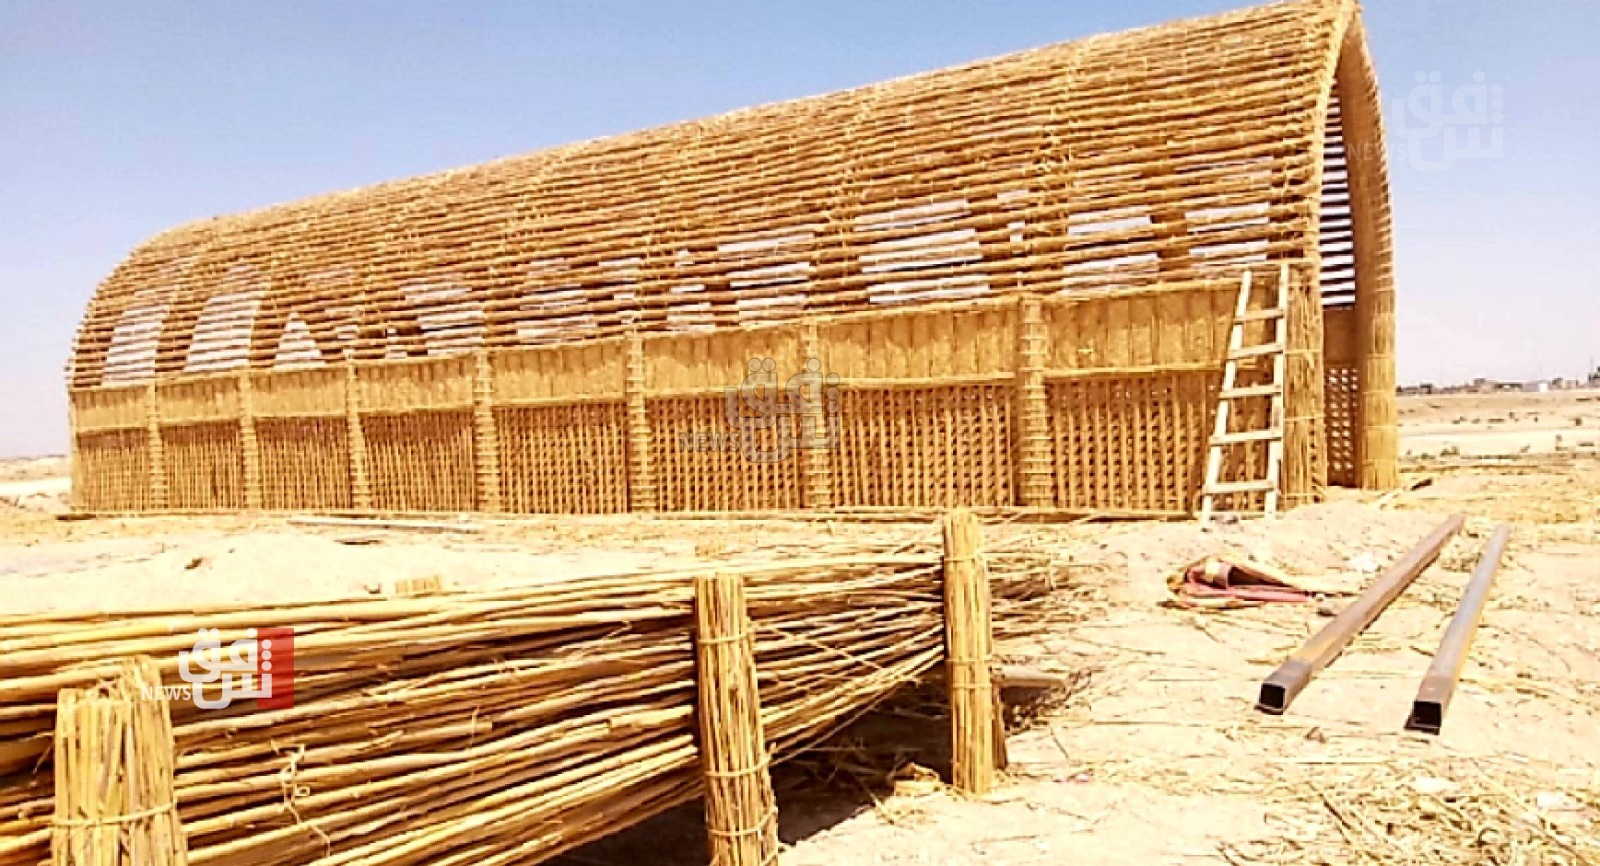 A new tourism experience first human settlement in the marshes of Basra